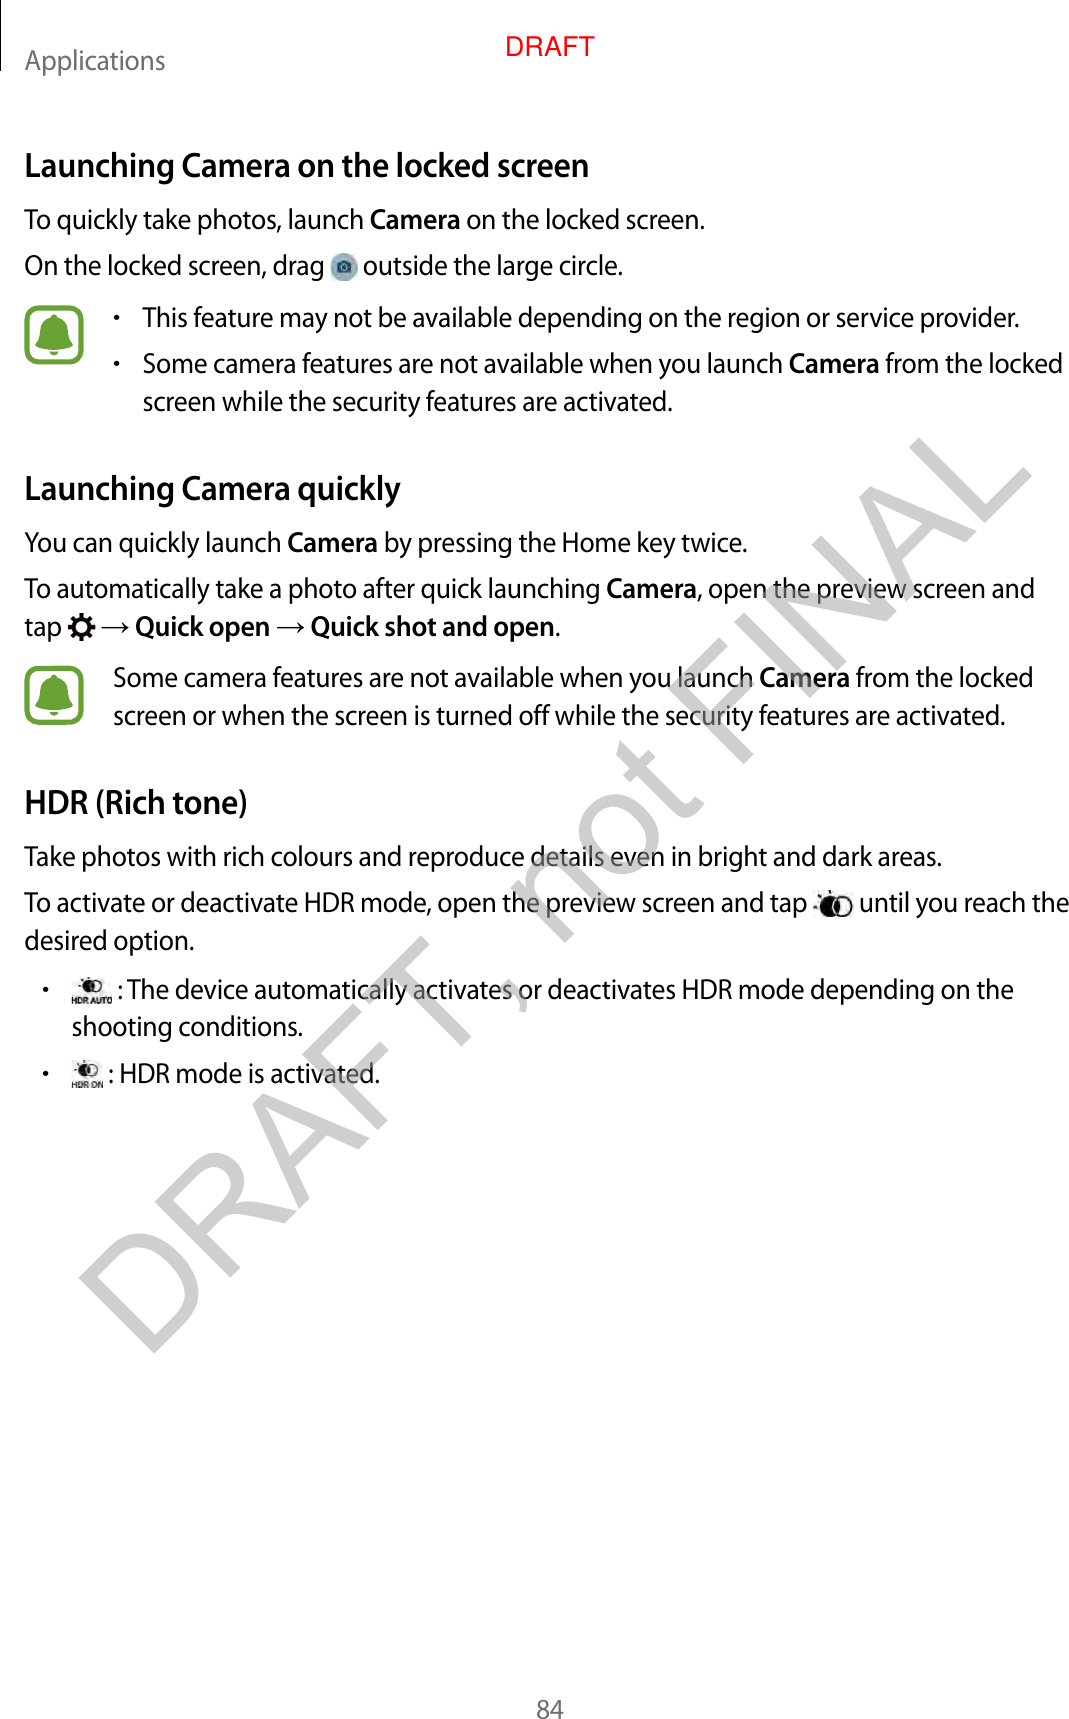 Applications84Launching Camera on the locked screenTo quickly take photos, launch Camera on the locked screen.On the locked screen, drag   outside the large circle.•This feature may not be available depending on the region or service provider.•Some camera features are not available when you launch Camera from the locked screen while the security features are activated.Launching Camera quicklyYou can quickly launch Camera by pressing the Home key twice.To automatically take a photo after quick launching Camera, open the preview screen and tap    Quick open  Quick shot and open.Some camera features are not available when you launch Camera from the locked screen or when the screen is turned off while the security features are activated.HDR (Rich tone)Take photos with rich colours and reproduce details even in bright and dark areas.To activate or deactivate HDR mode, open the preview screen and tap   until you reach the desired option.• : The device automatically activates or deactivates HDR mode depending on the shooting conditions.• : HDR mode is activated.DRAFT, not FINALDRAFT